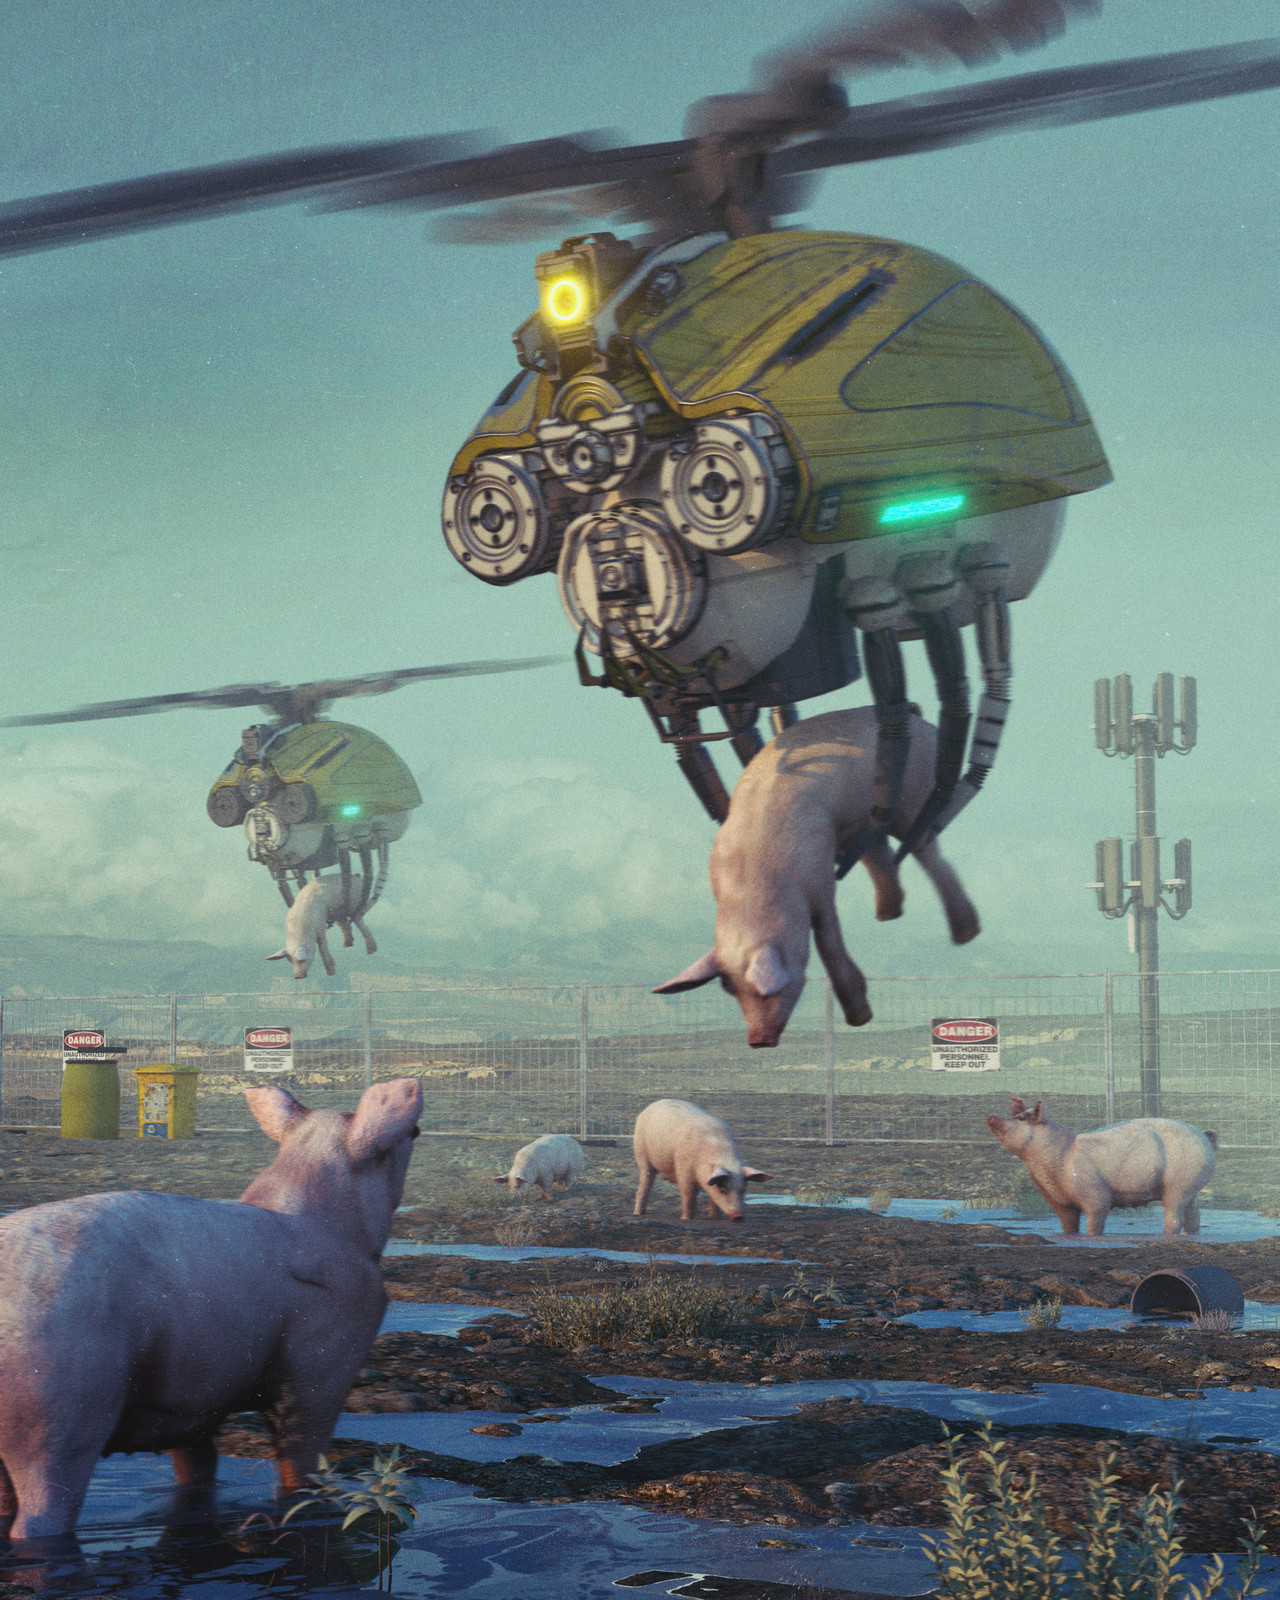 animumble:
“ PIG THIEF by beeple
”